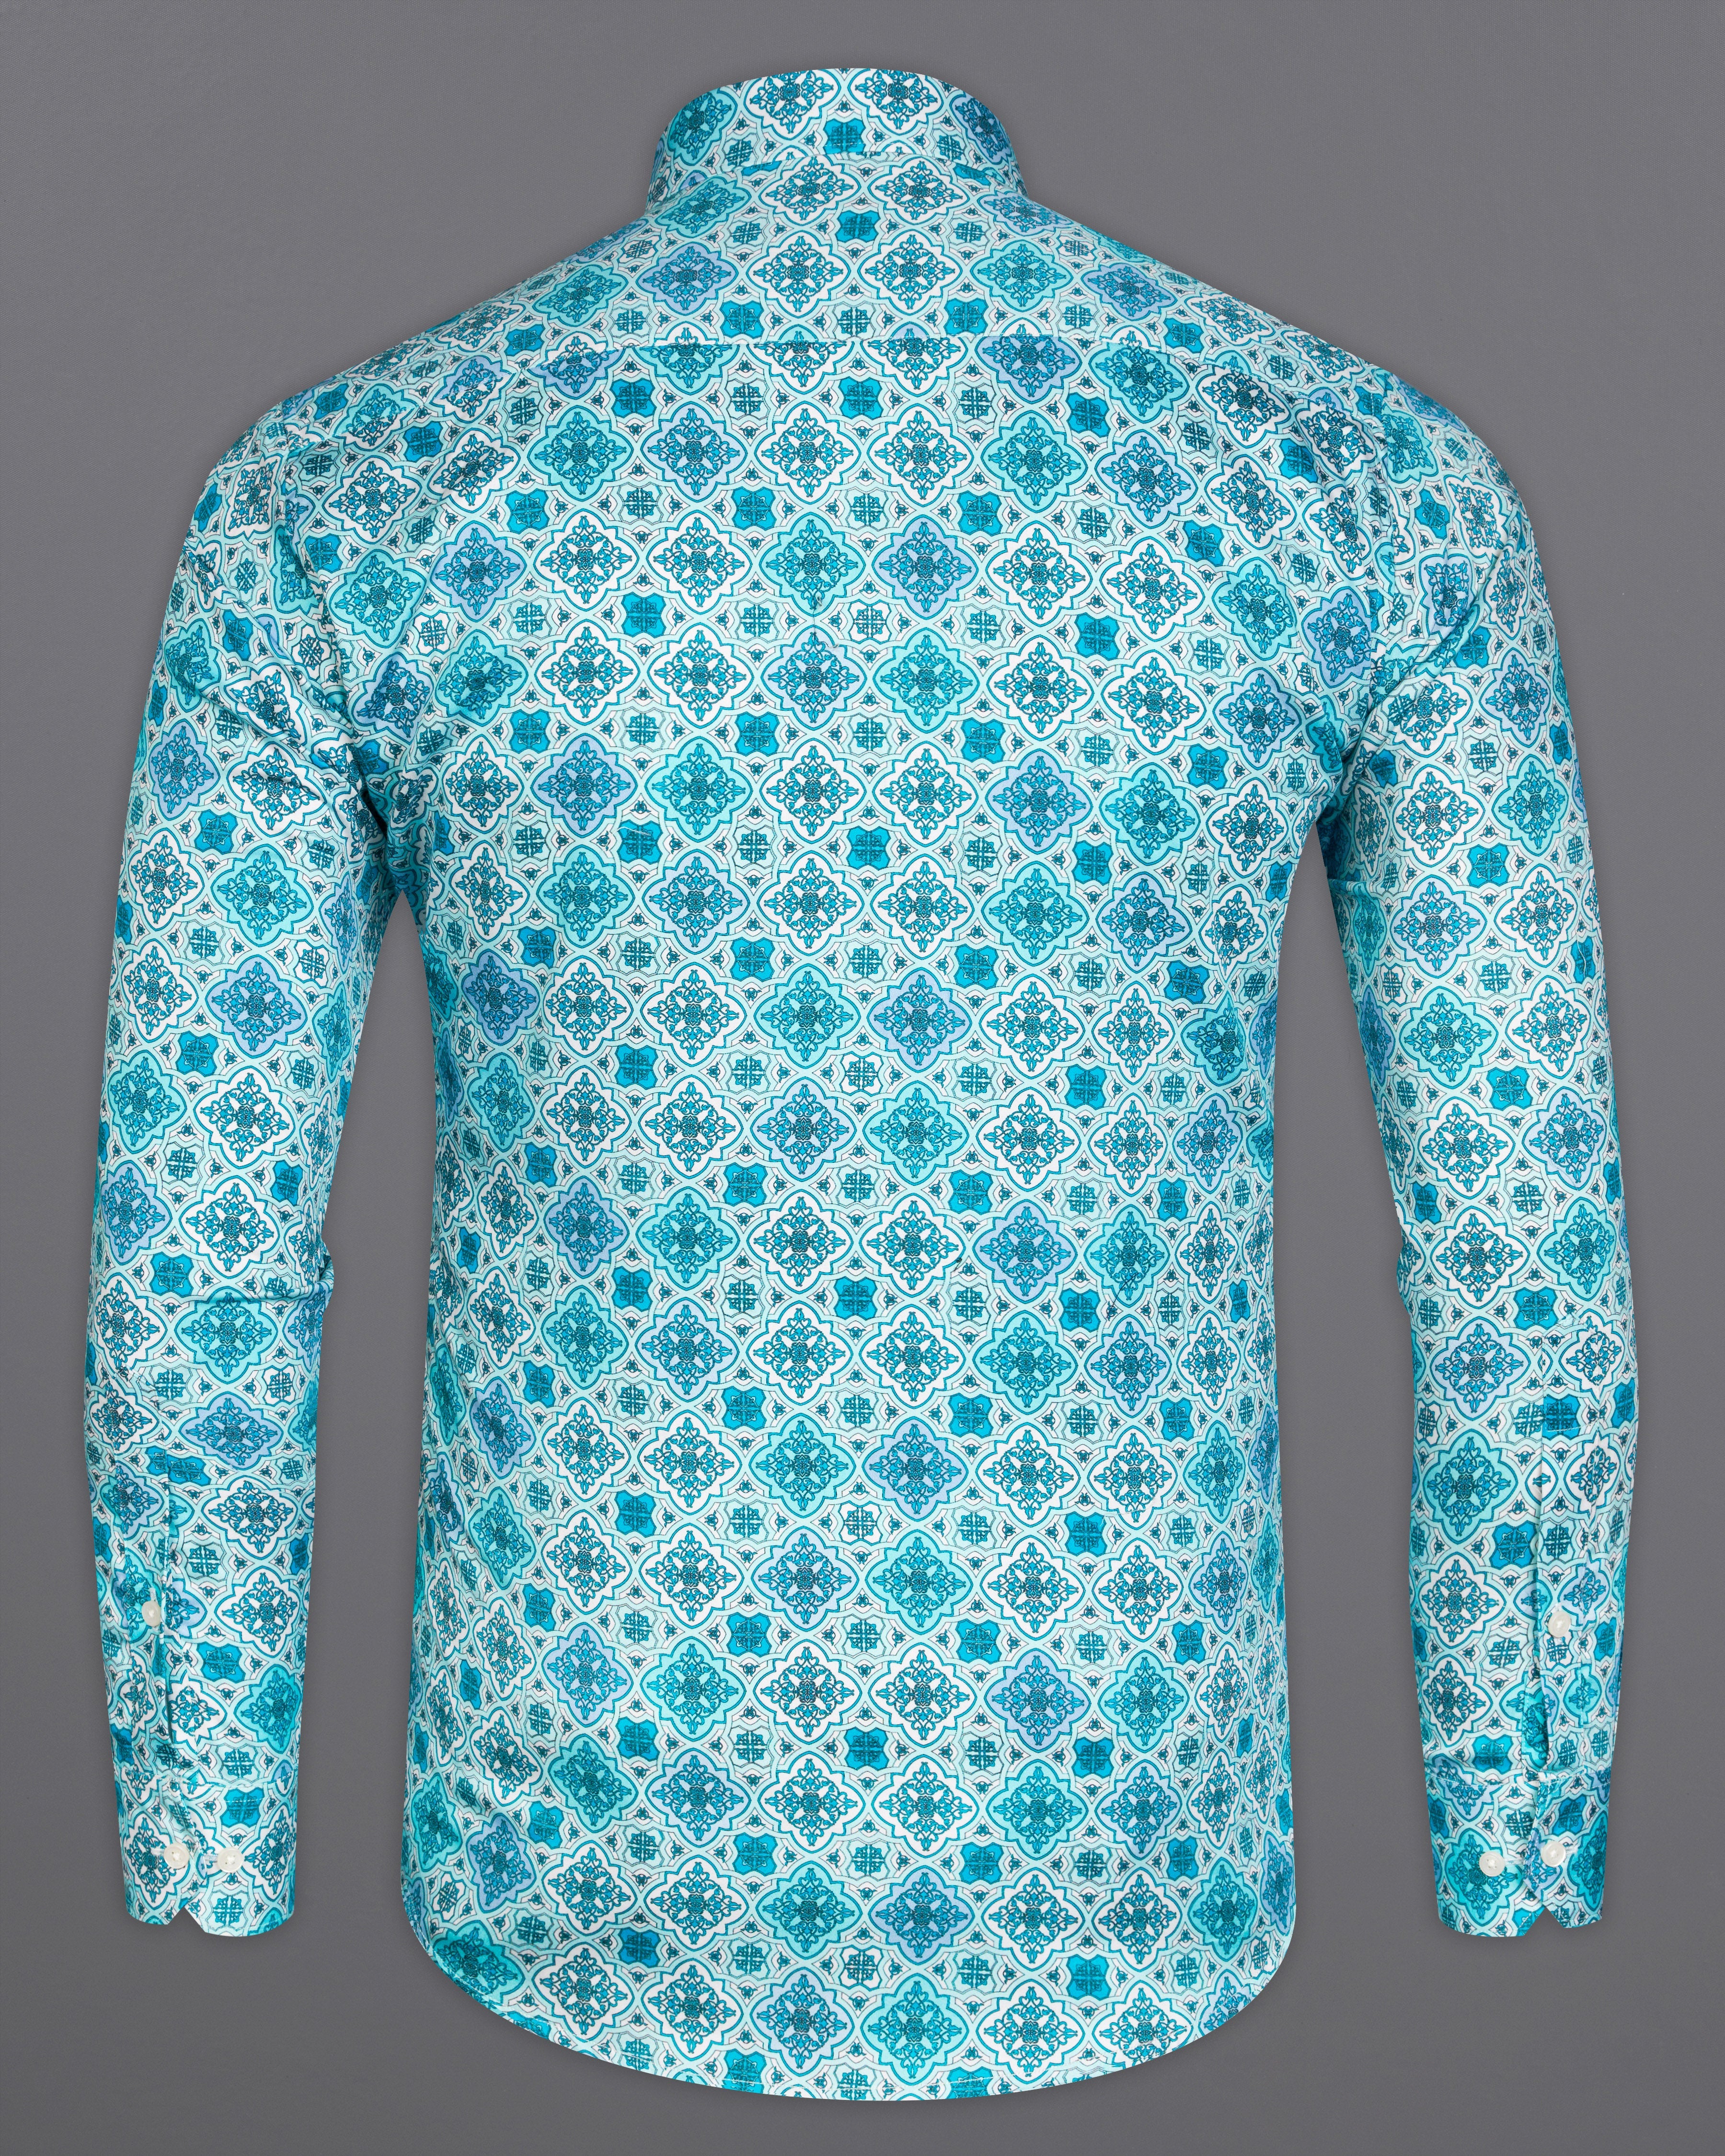 Turquoise Blue and White Indian Style Printed Super Soft Premium Cotton Shirt 9908-38, 9908-H-38, 9908-39, 9908-H-39, 9908-40, 9908-H-40, 9908-42, 9908-H-42, 9908-44, 9908-H-44, 9908-46, 9908-H-46, 9908-48, 9908-H-48, 9908-50, 9908-H-50, 9908-52, 9908-H-52